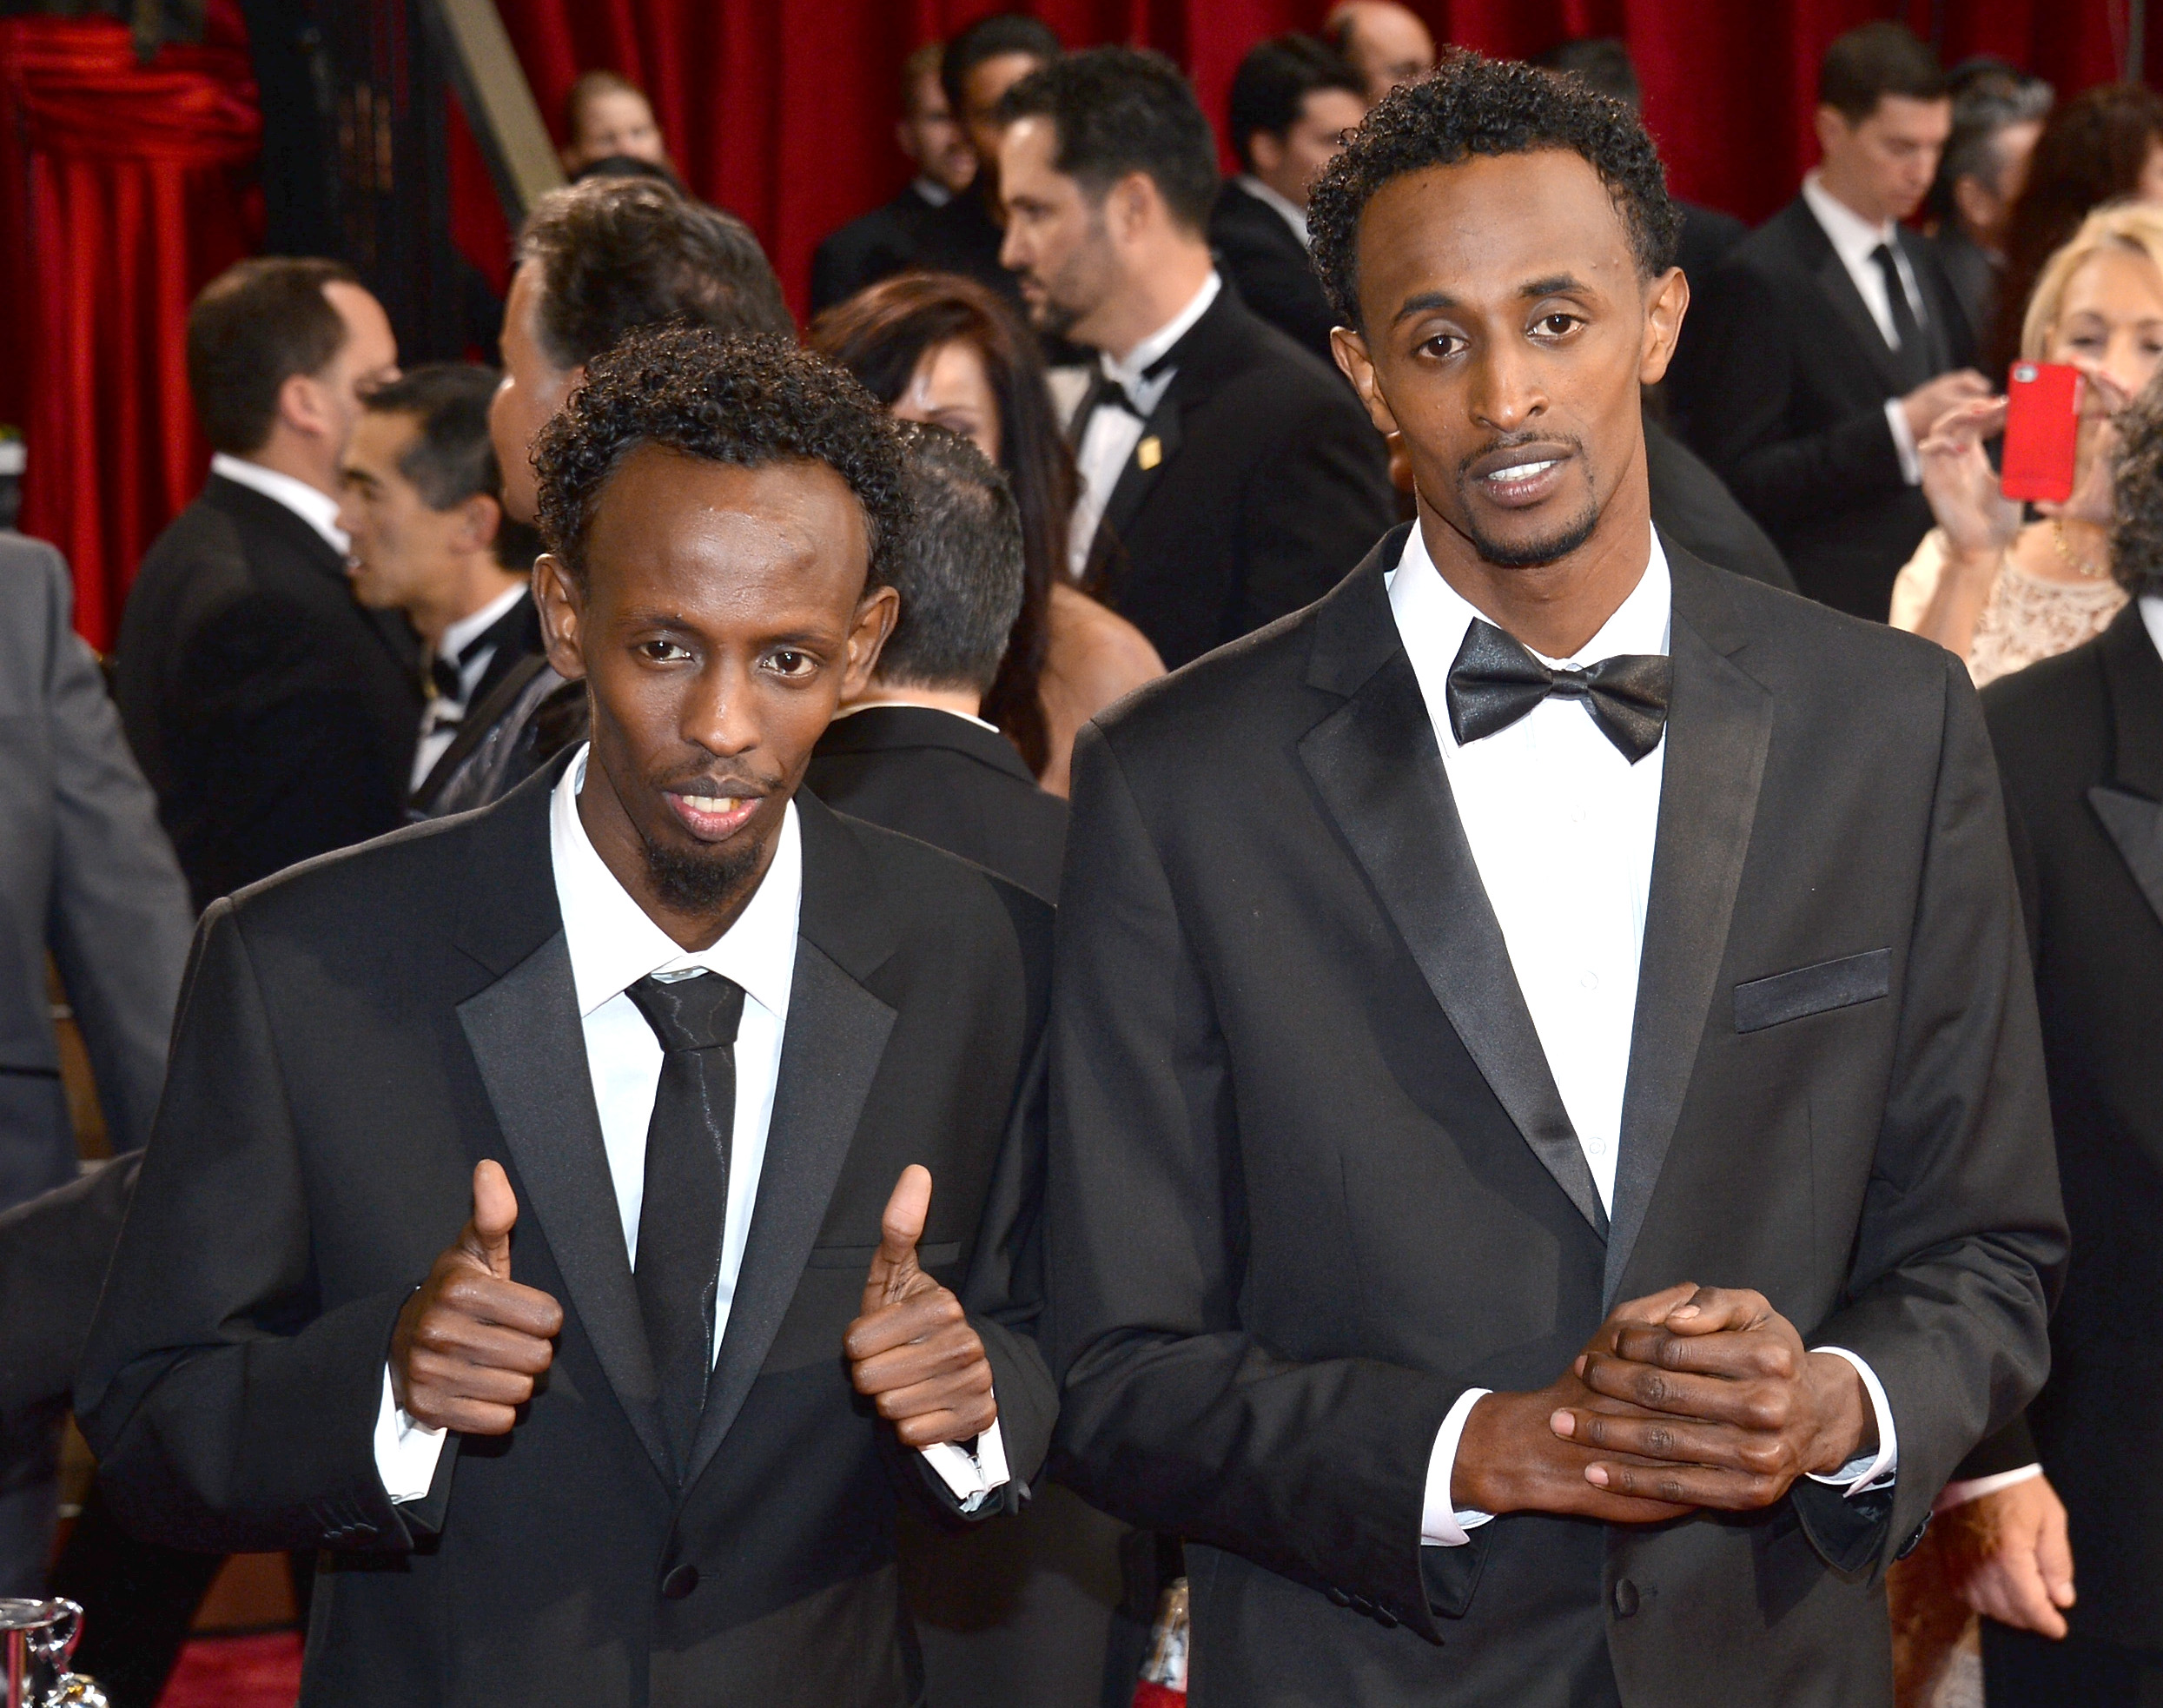 Actors Barkhad Abdi (L) and Faysal Ahmed attend the Oscars. Photo: Michael Buckner/Getty Images